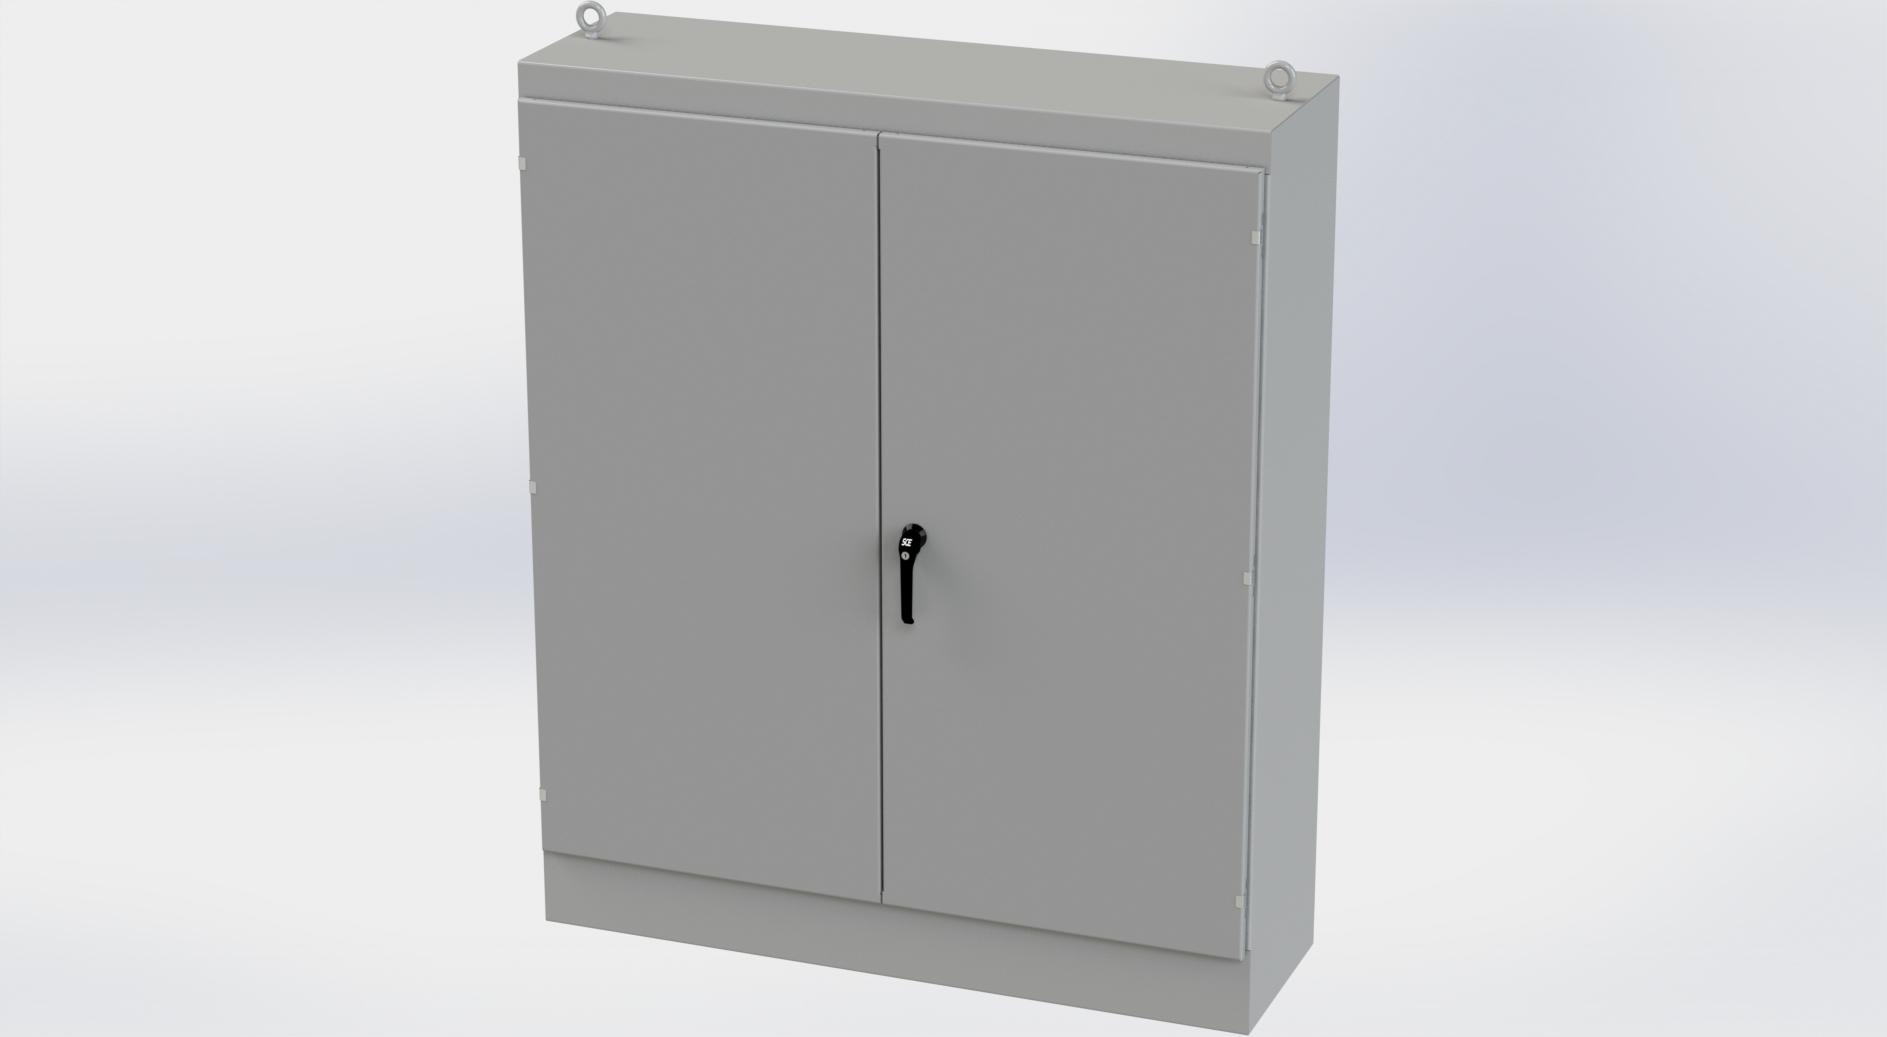 Saginaw Control SCE-726018FSD FSD Enclosure, Height:72.00", Width:60.00", Depth:18.00", ANSI-61 gray finish inside and out. Optional sub-panels are powder coated white.